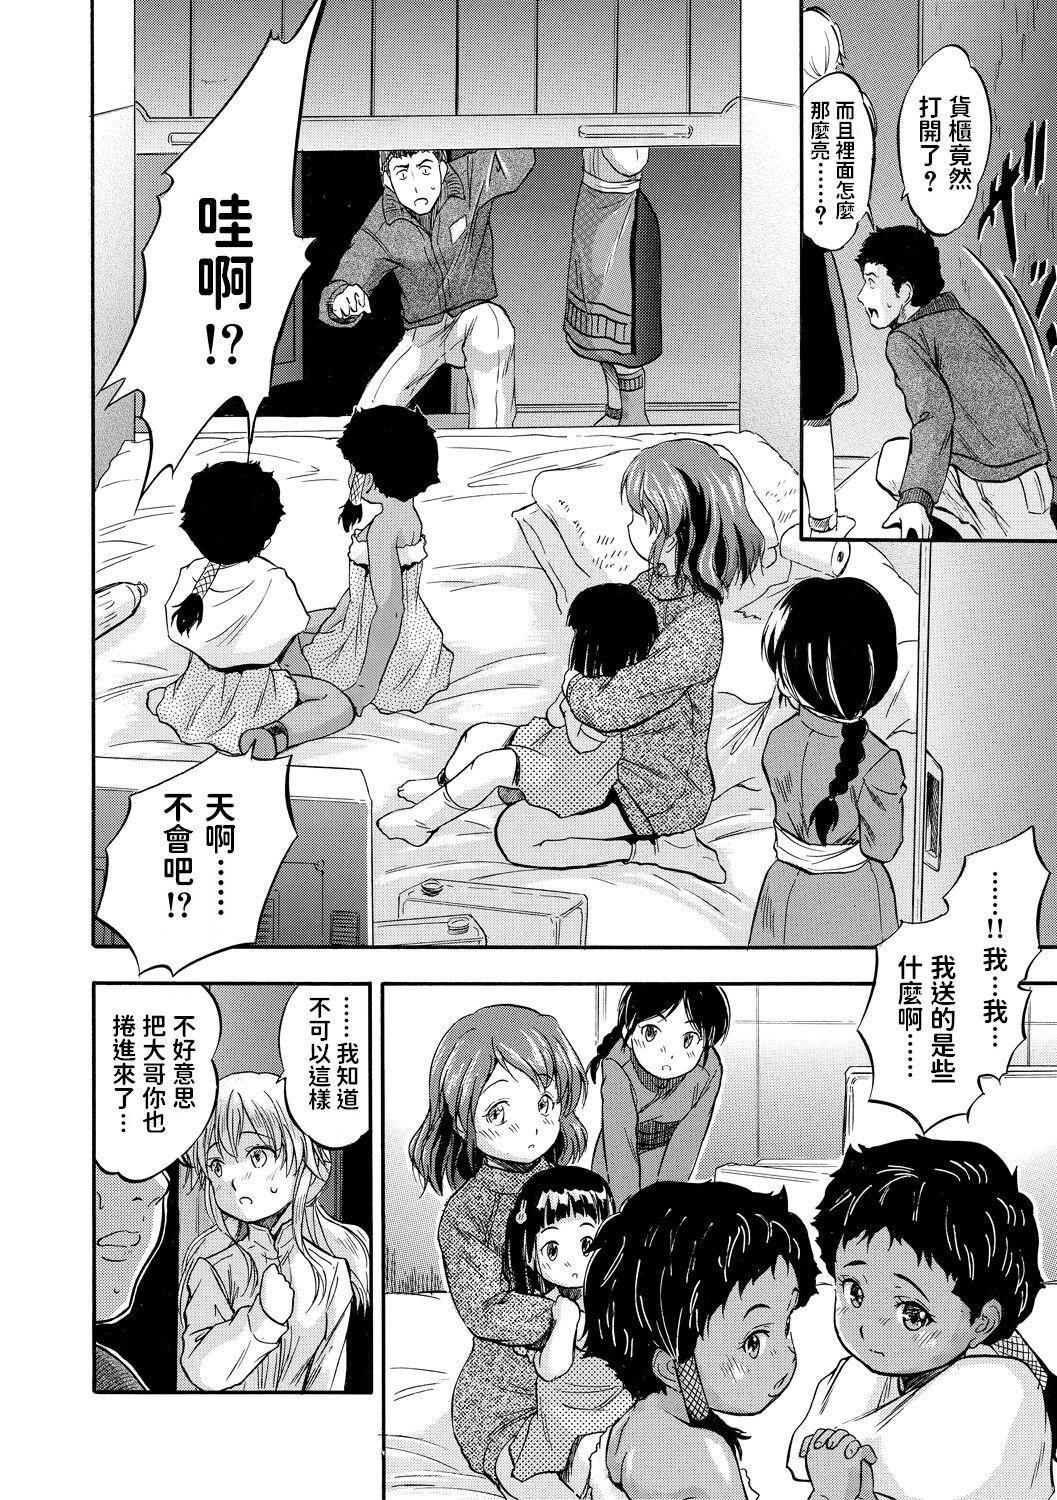 Livesex [智沢渚優] 運び屋のお仕事 (つるぺたハーレムだよ♥) 中文翻譯 Old And Young - Page 4